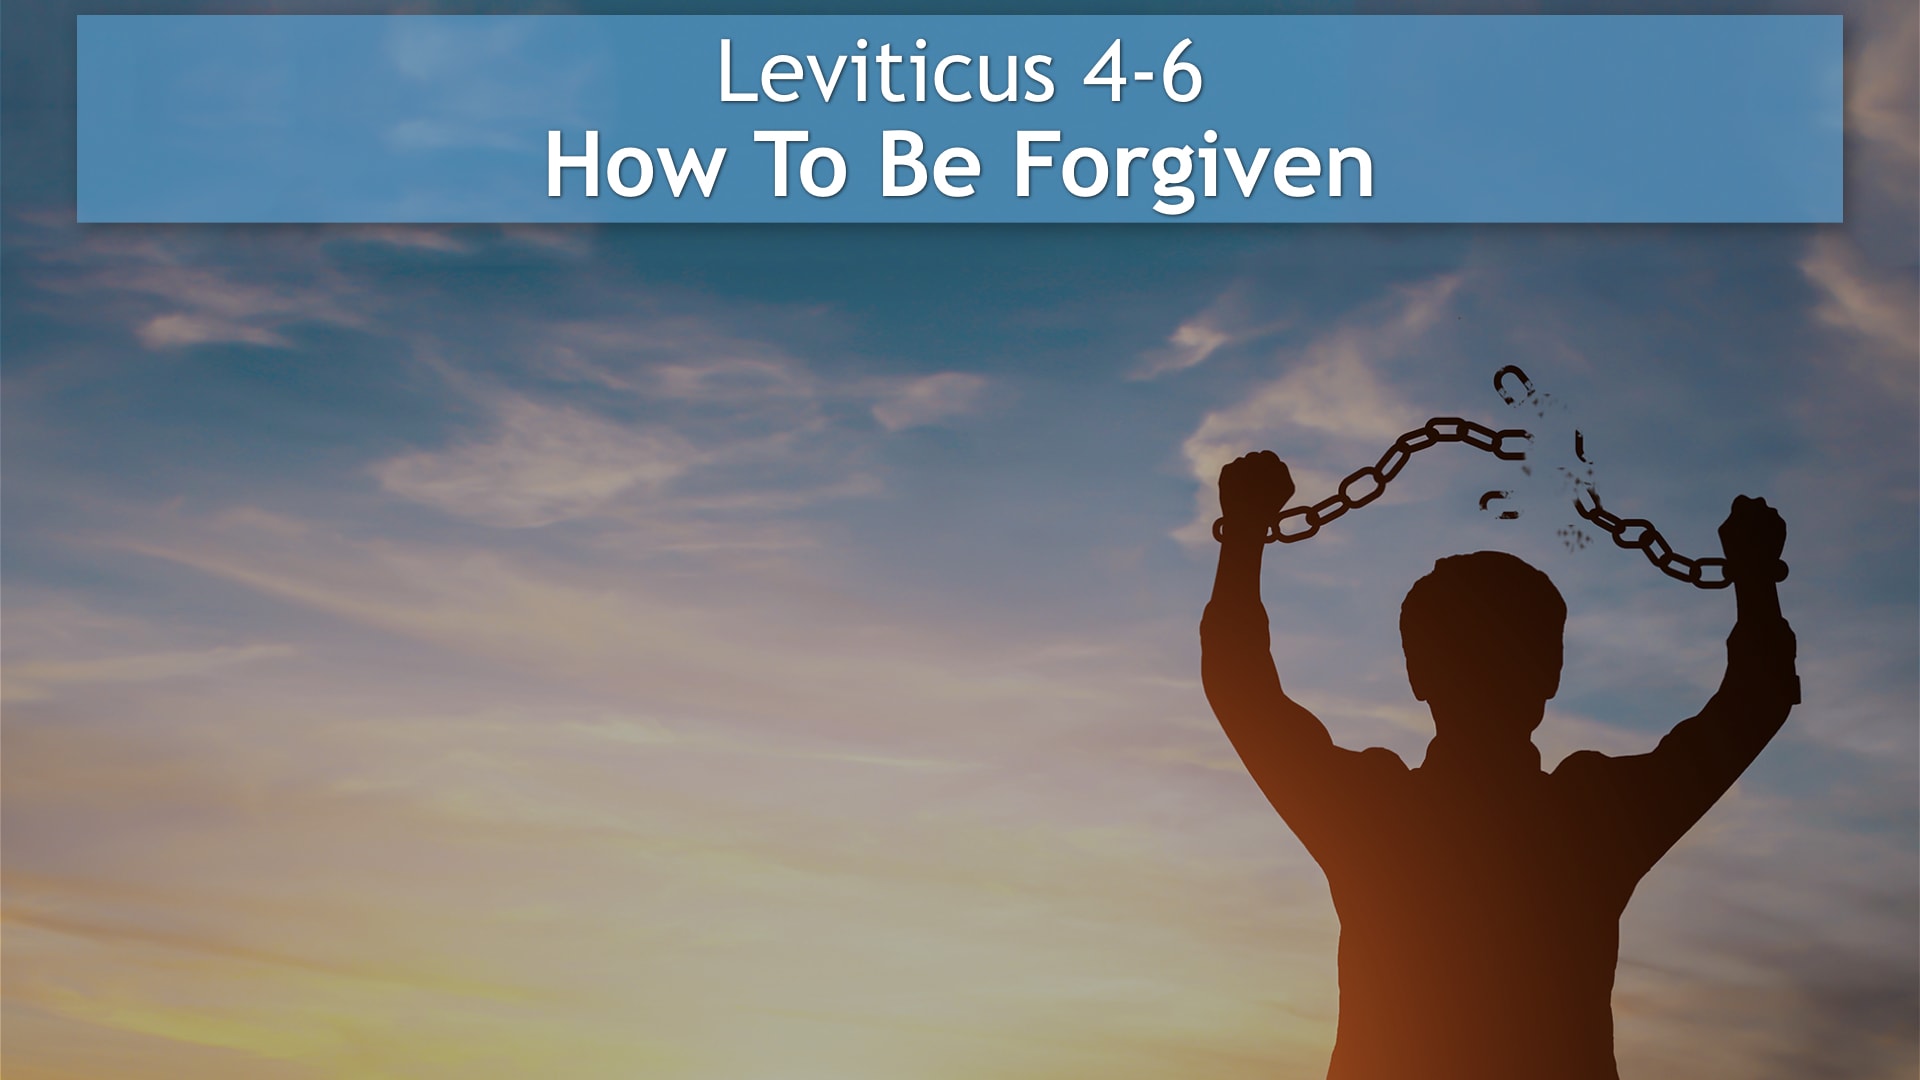 Jerry Simmons teaching Leviticus 4-6, How To Be Forgiven